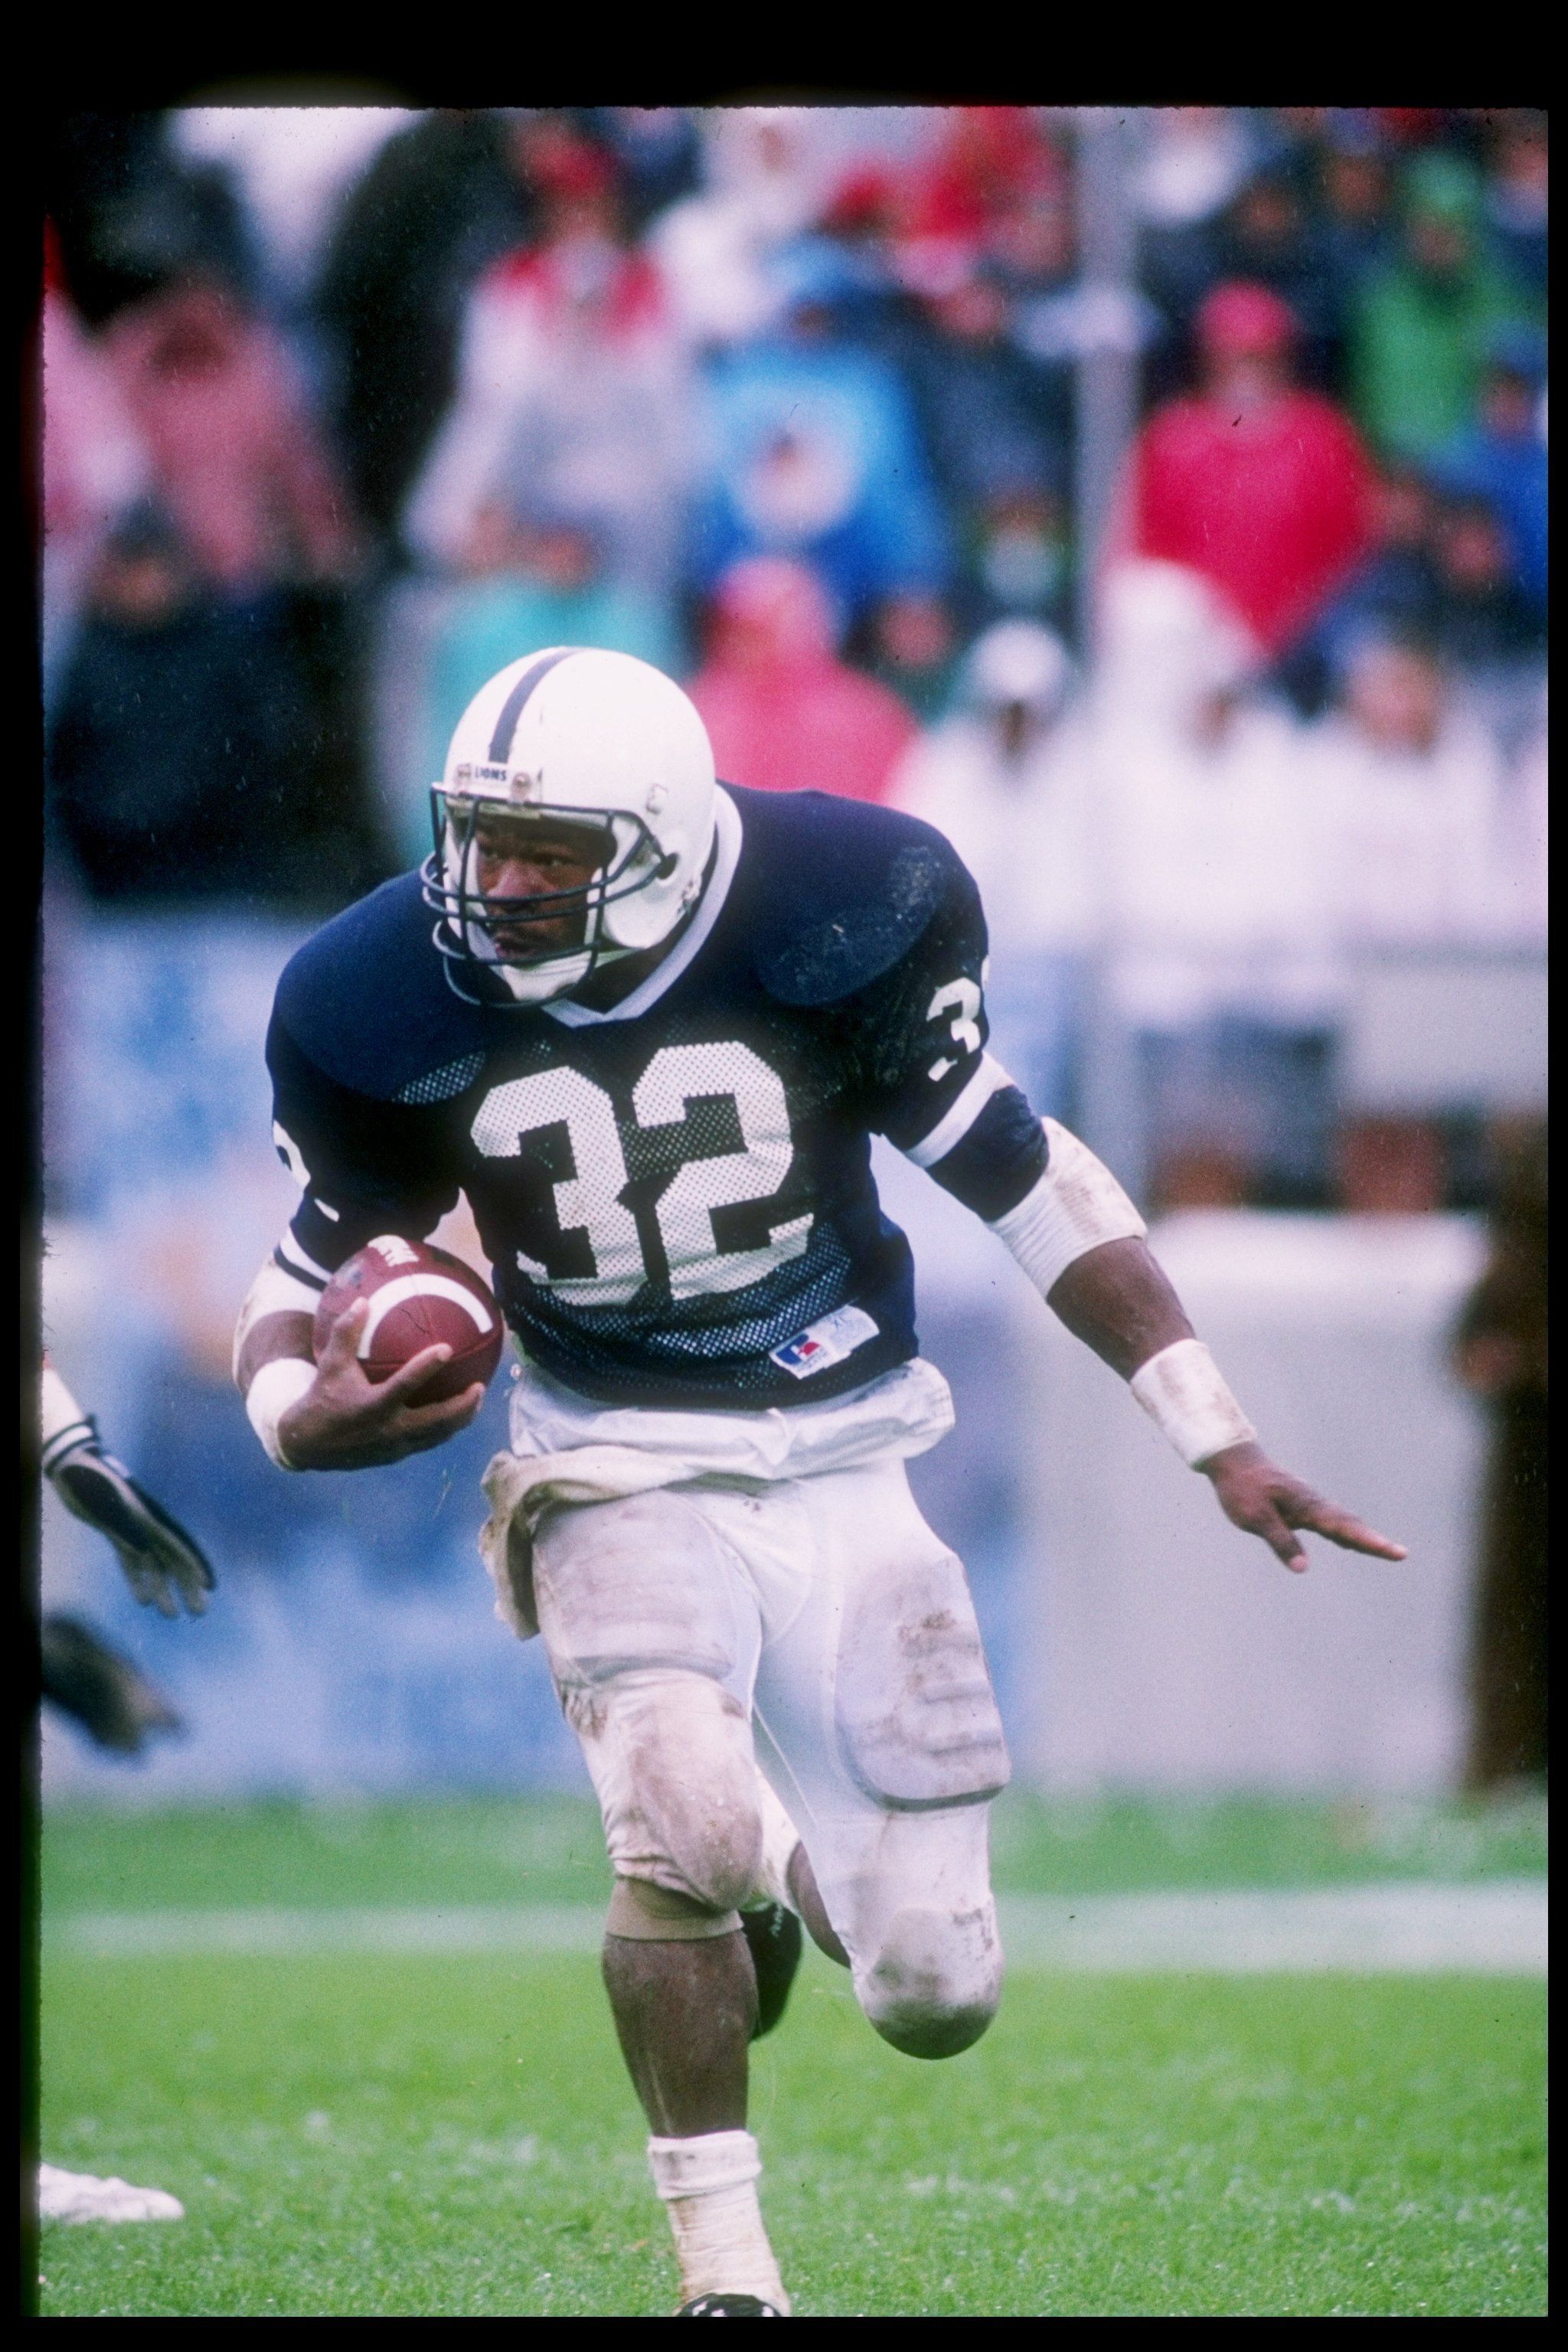 23 Sep 1989: Running back Blair Thomas of the Penn State Nittany Lions runs down the field during a game against the Boston College Eagles at Beaver Stadium in University Park, Pennsylvania. Penn State won the game 7-3.